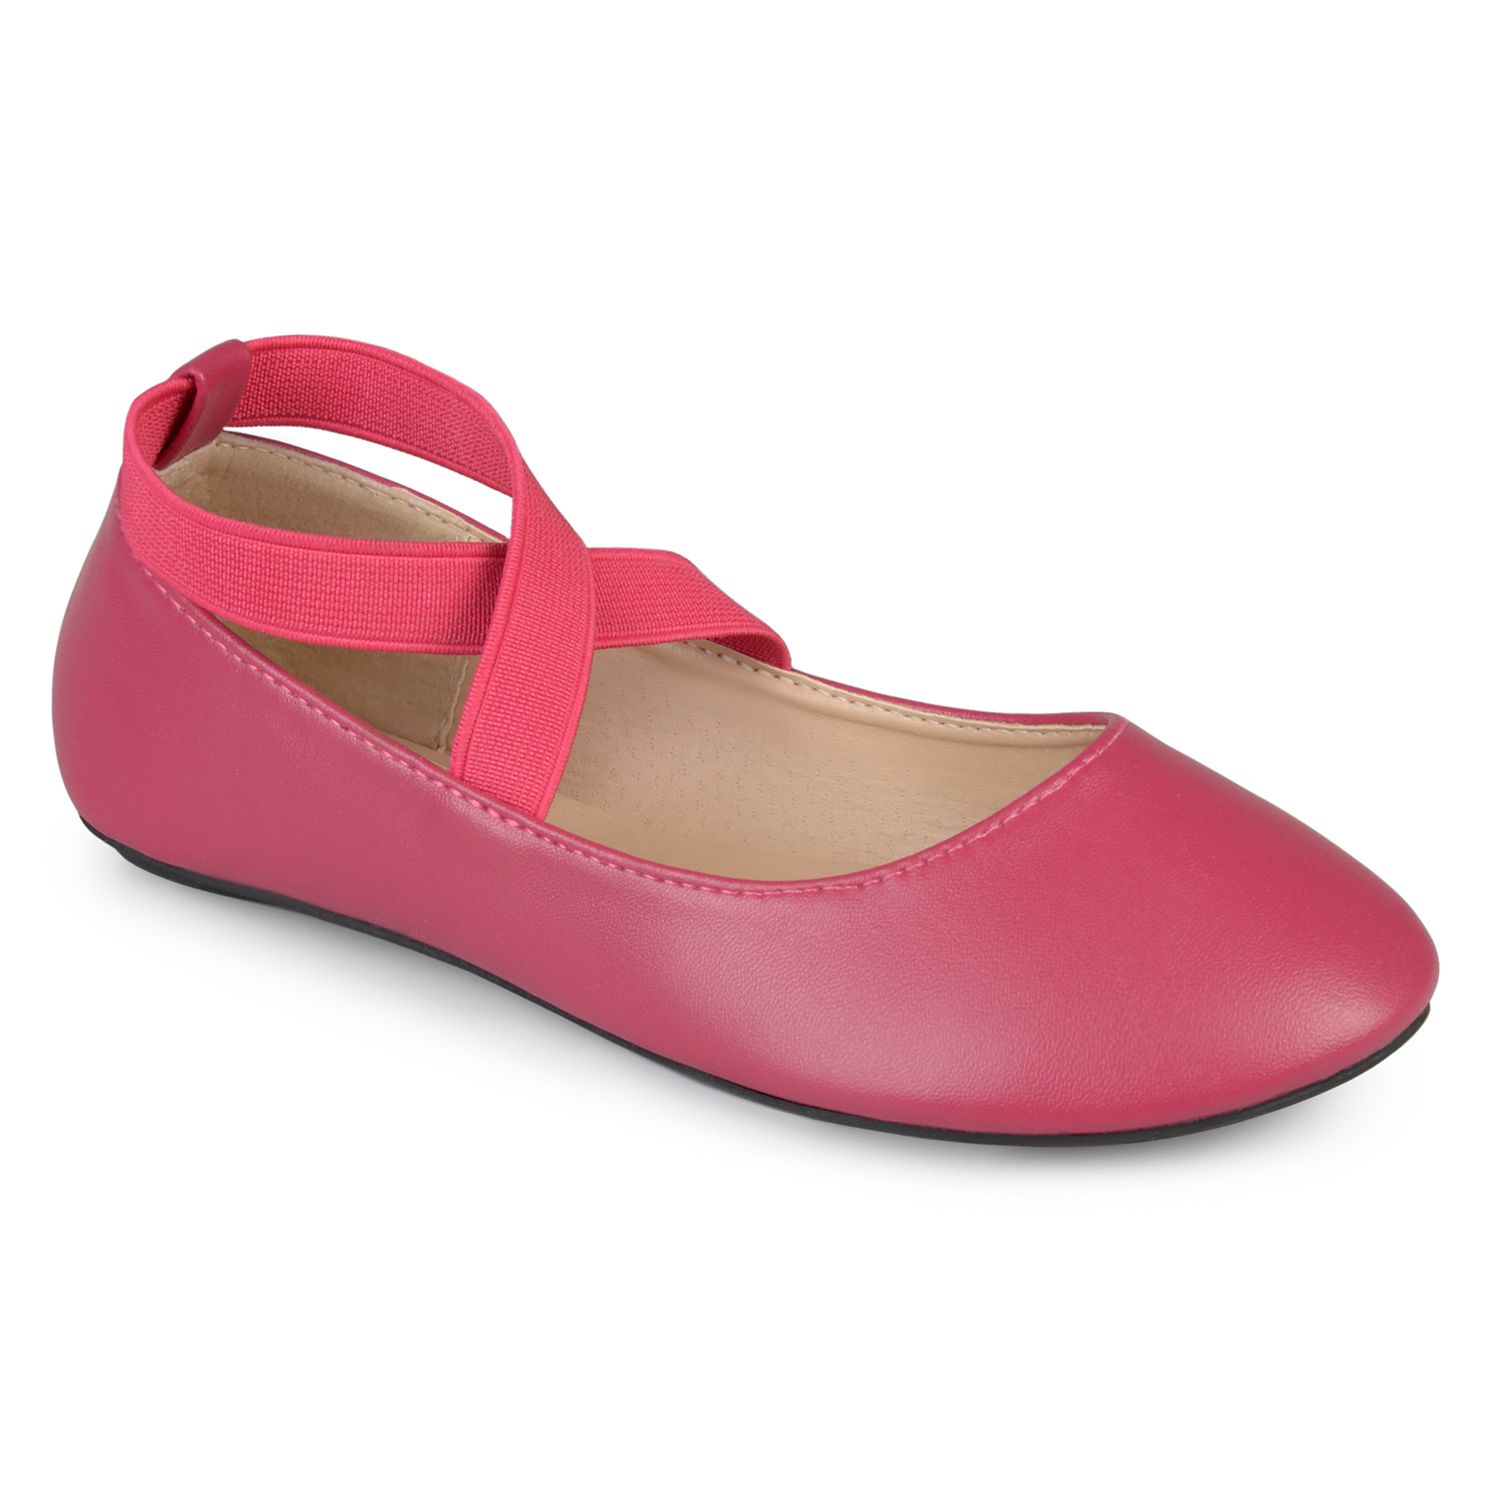 girls ballet style shoes